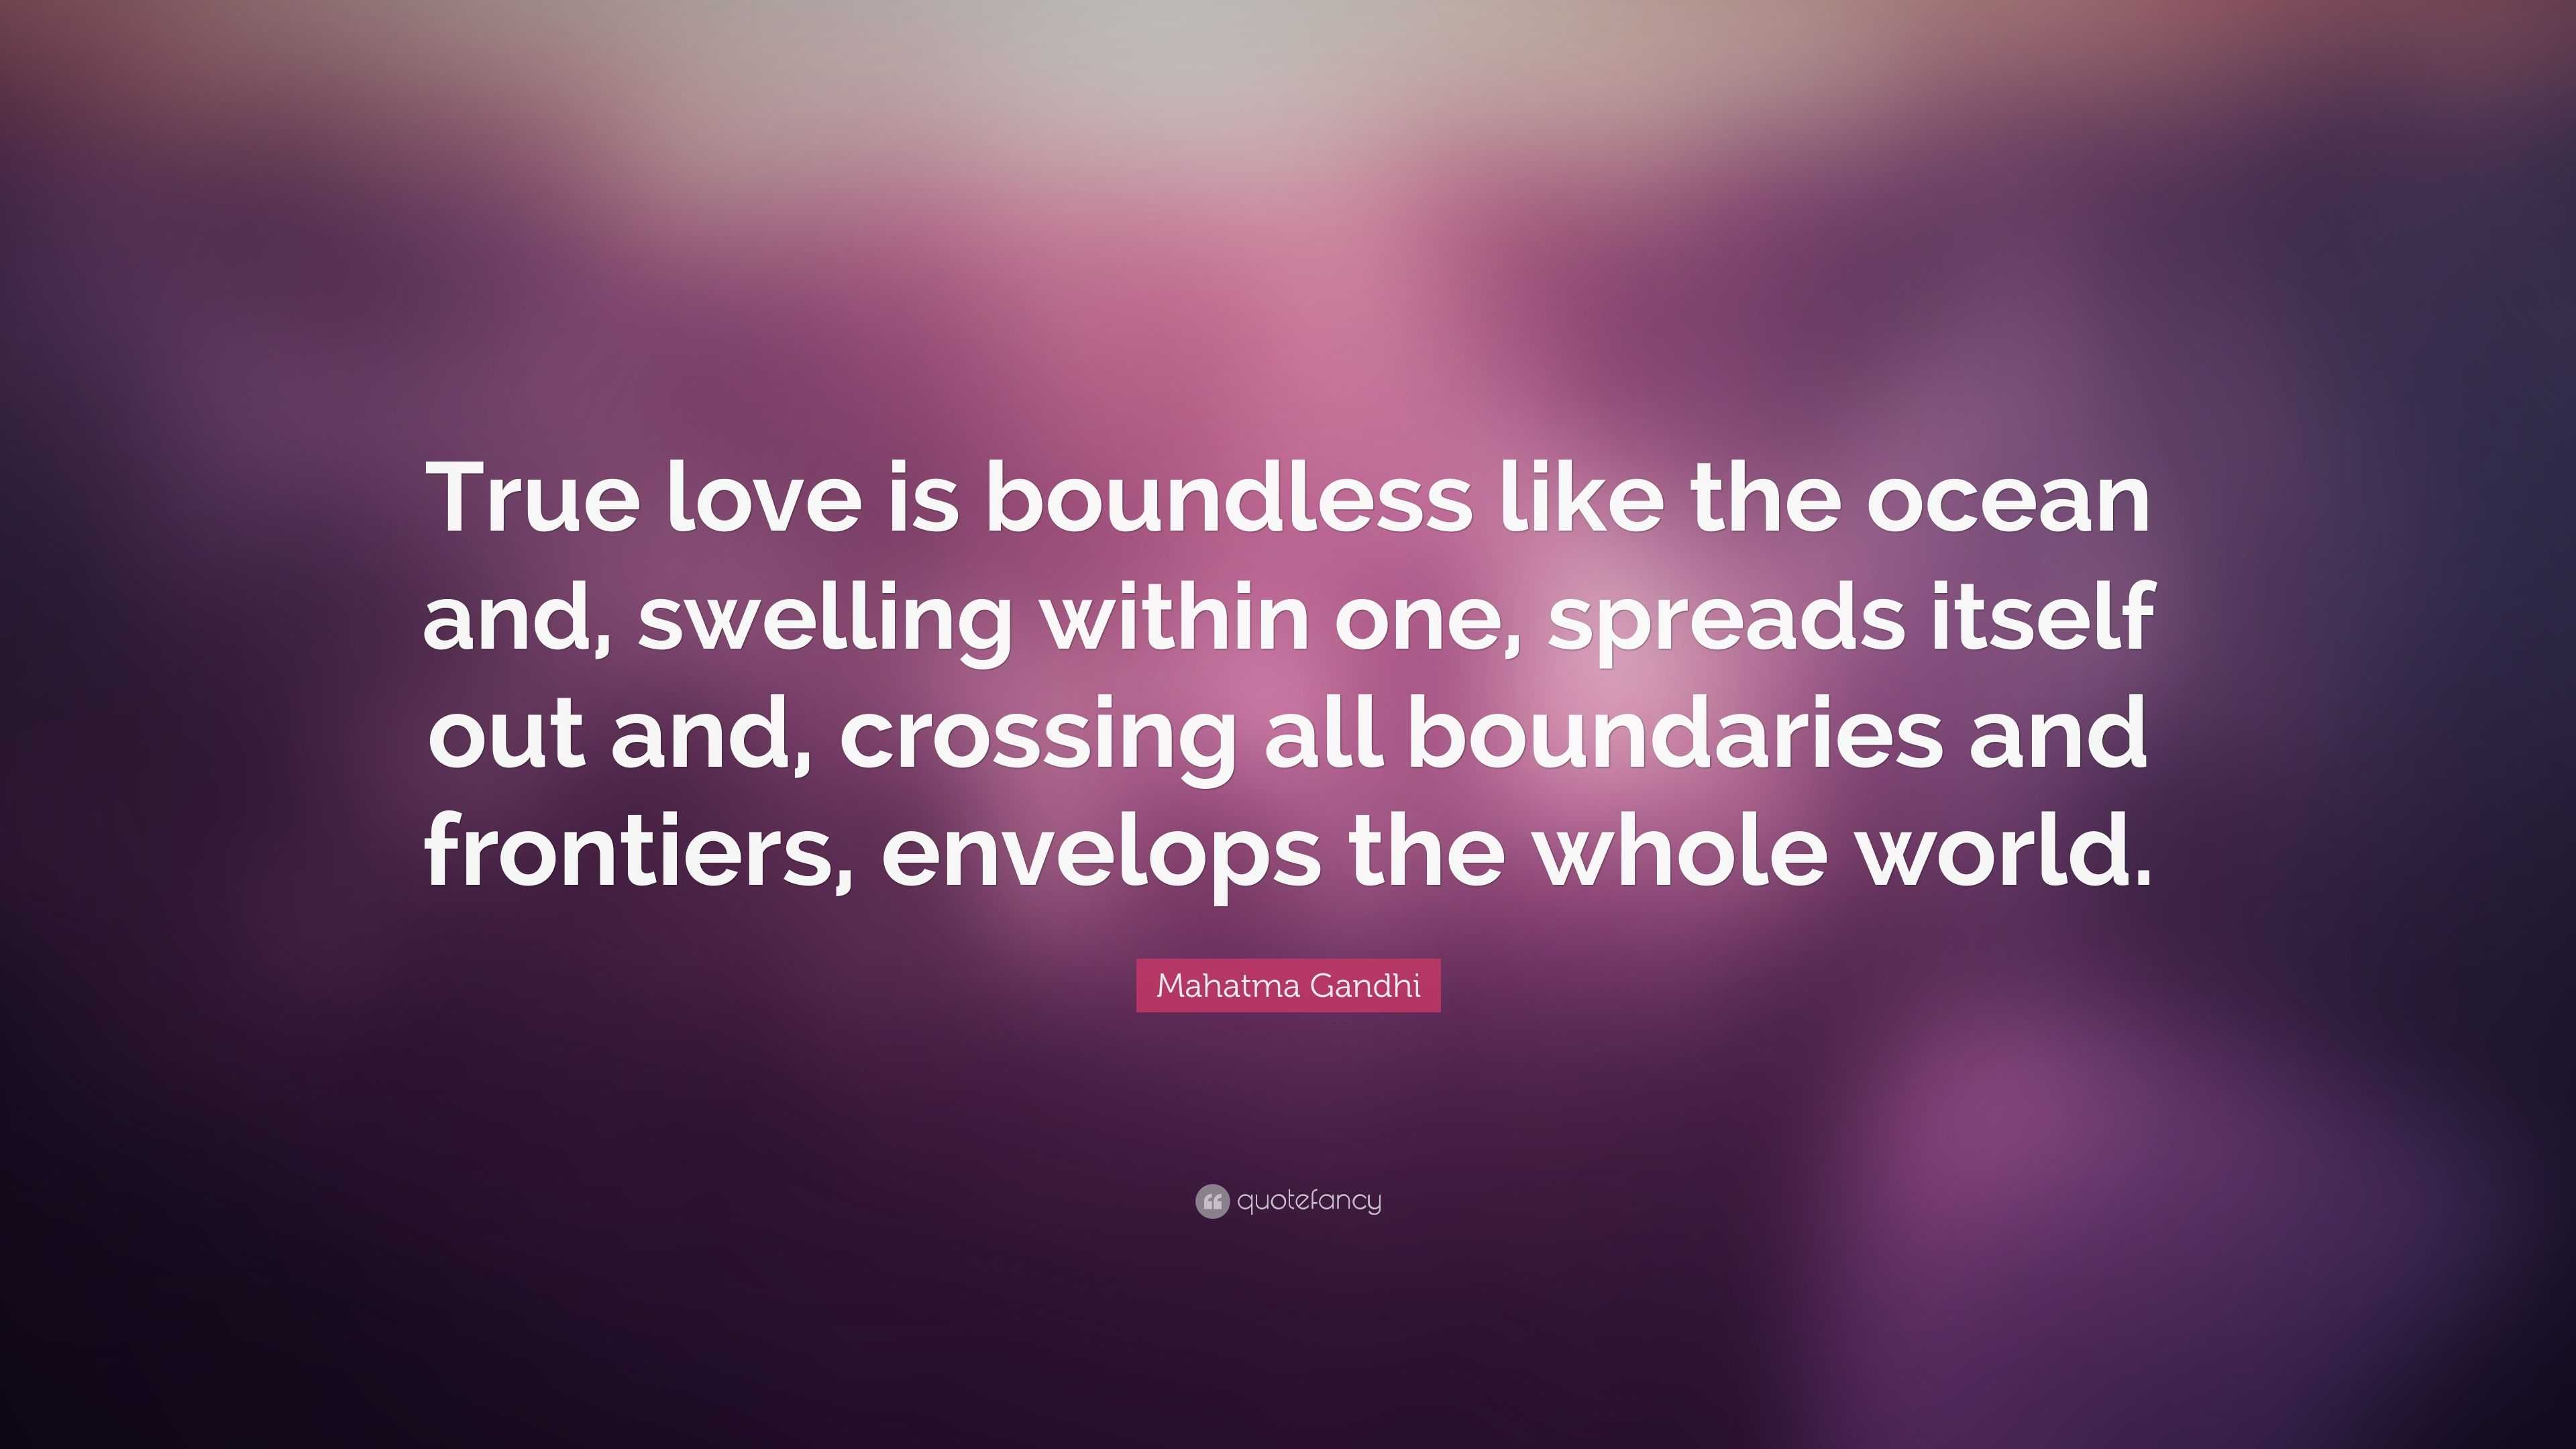 Mahatma Gandhi Quote “True love is boundless like the ocean and swelling within